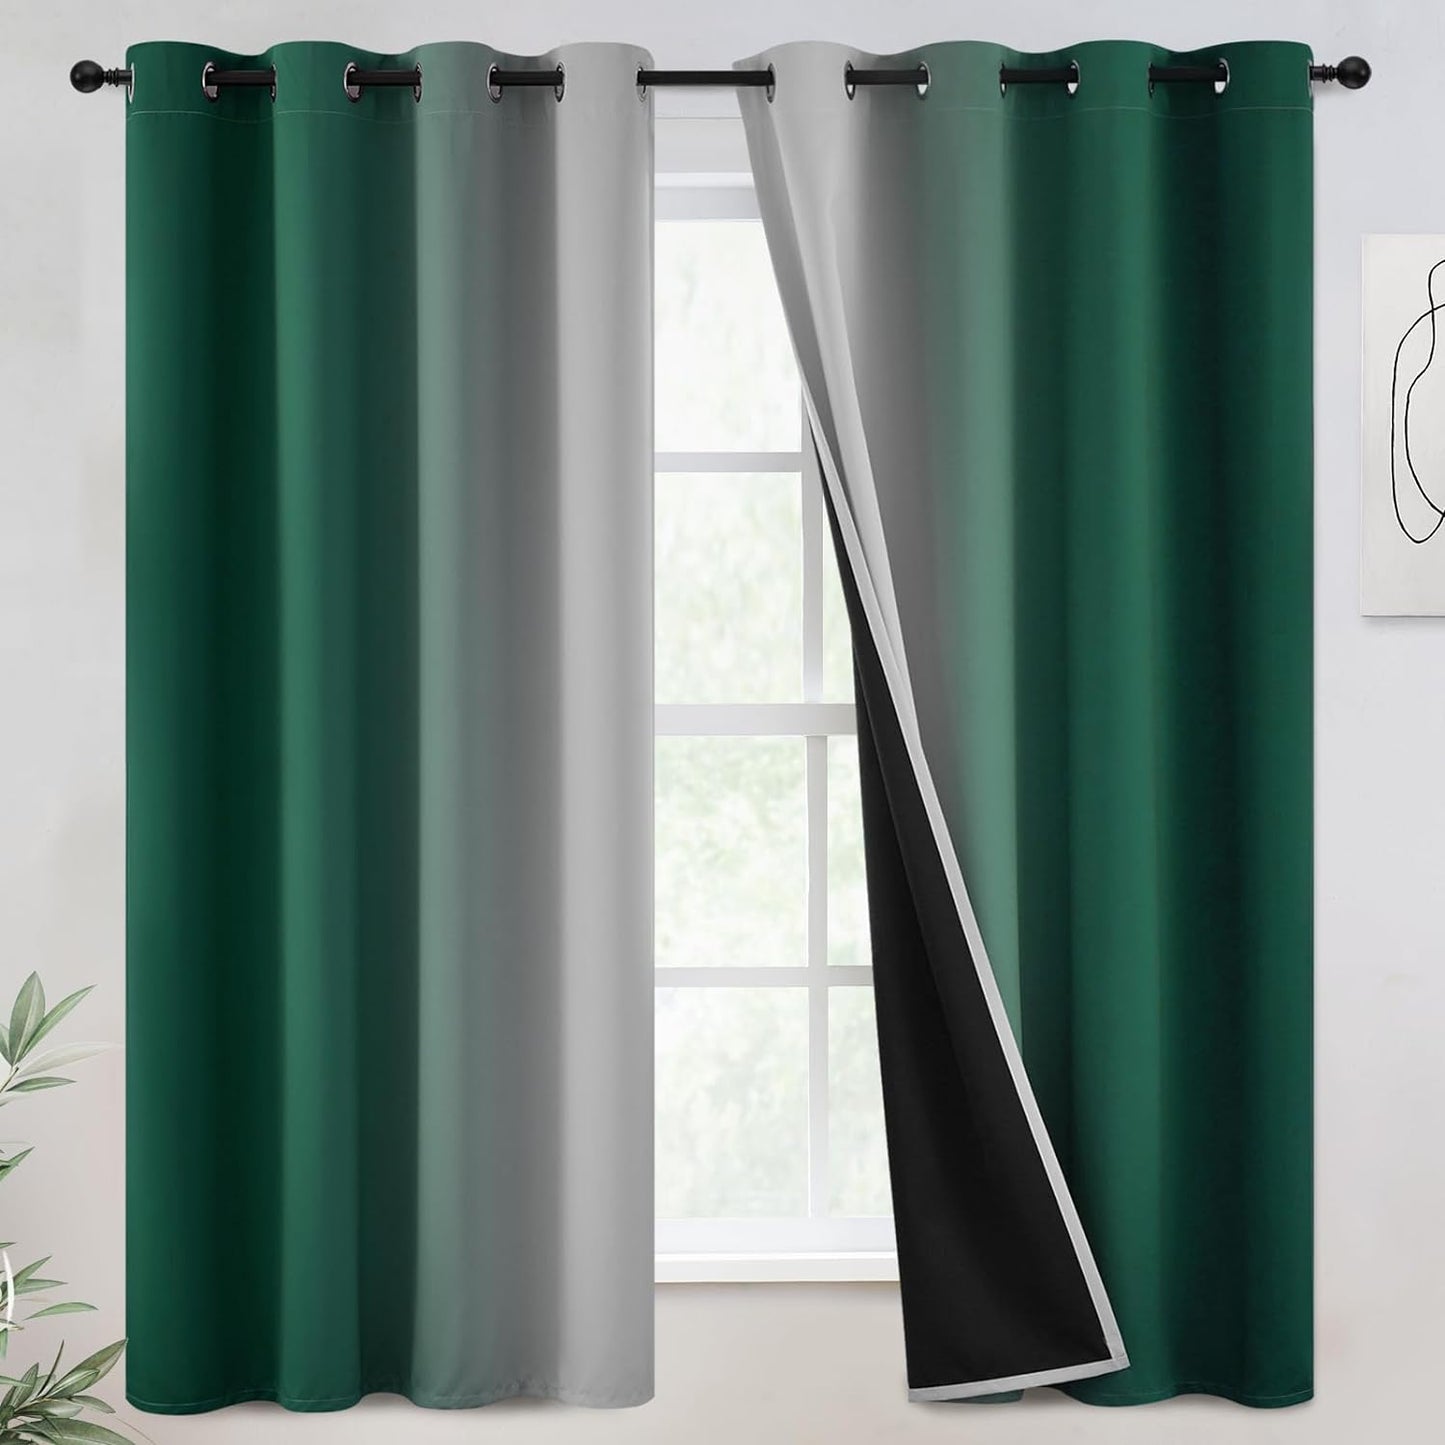 COSVIYA 100% Blackout Curtains & Drapes Ombre Purple Curtains 63 Inch Length 2 Panels,Full Room Darkening Grommet Gradient Insulated Thermal Window Curtains for Bedroom/Living Room,52X63 Inches  COSVIYA Green To Greyish White 52W X 63L 